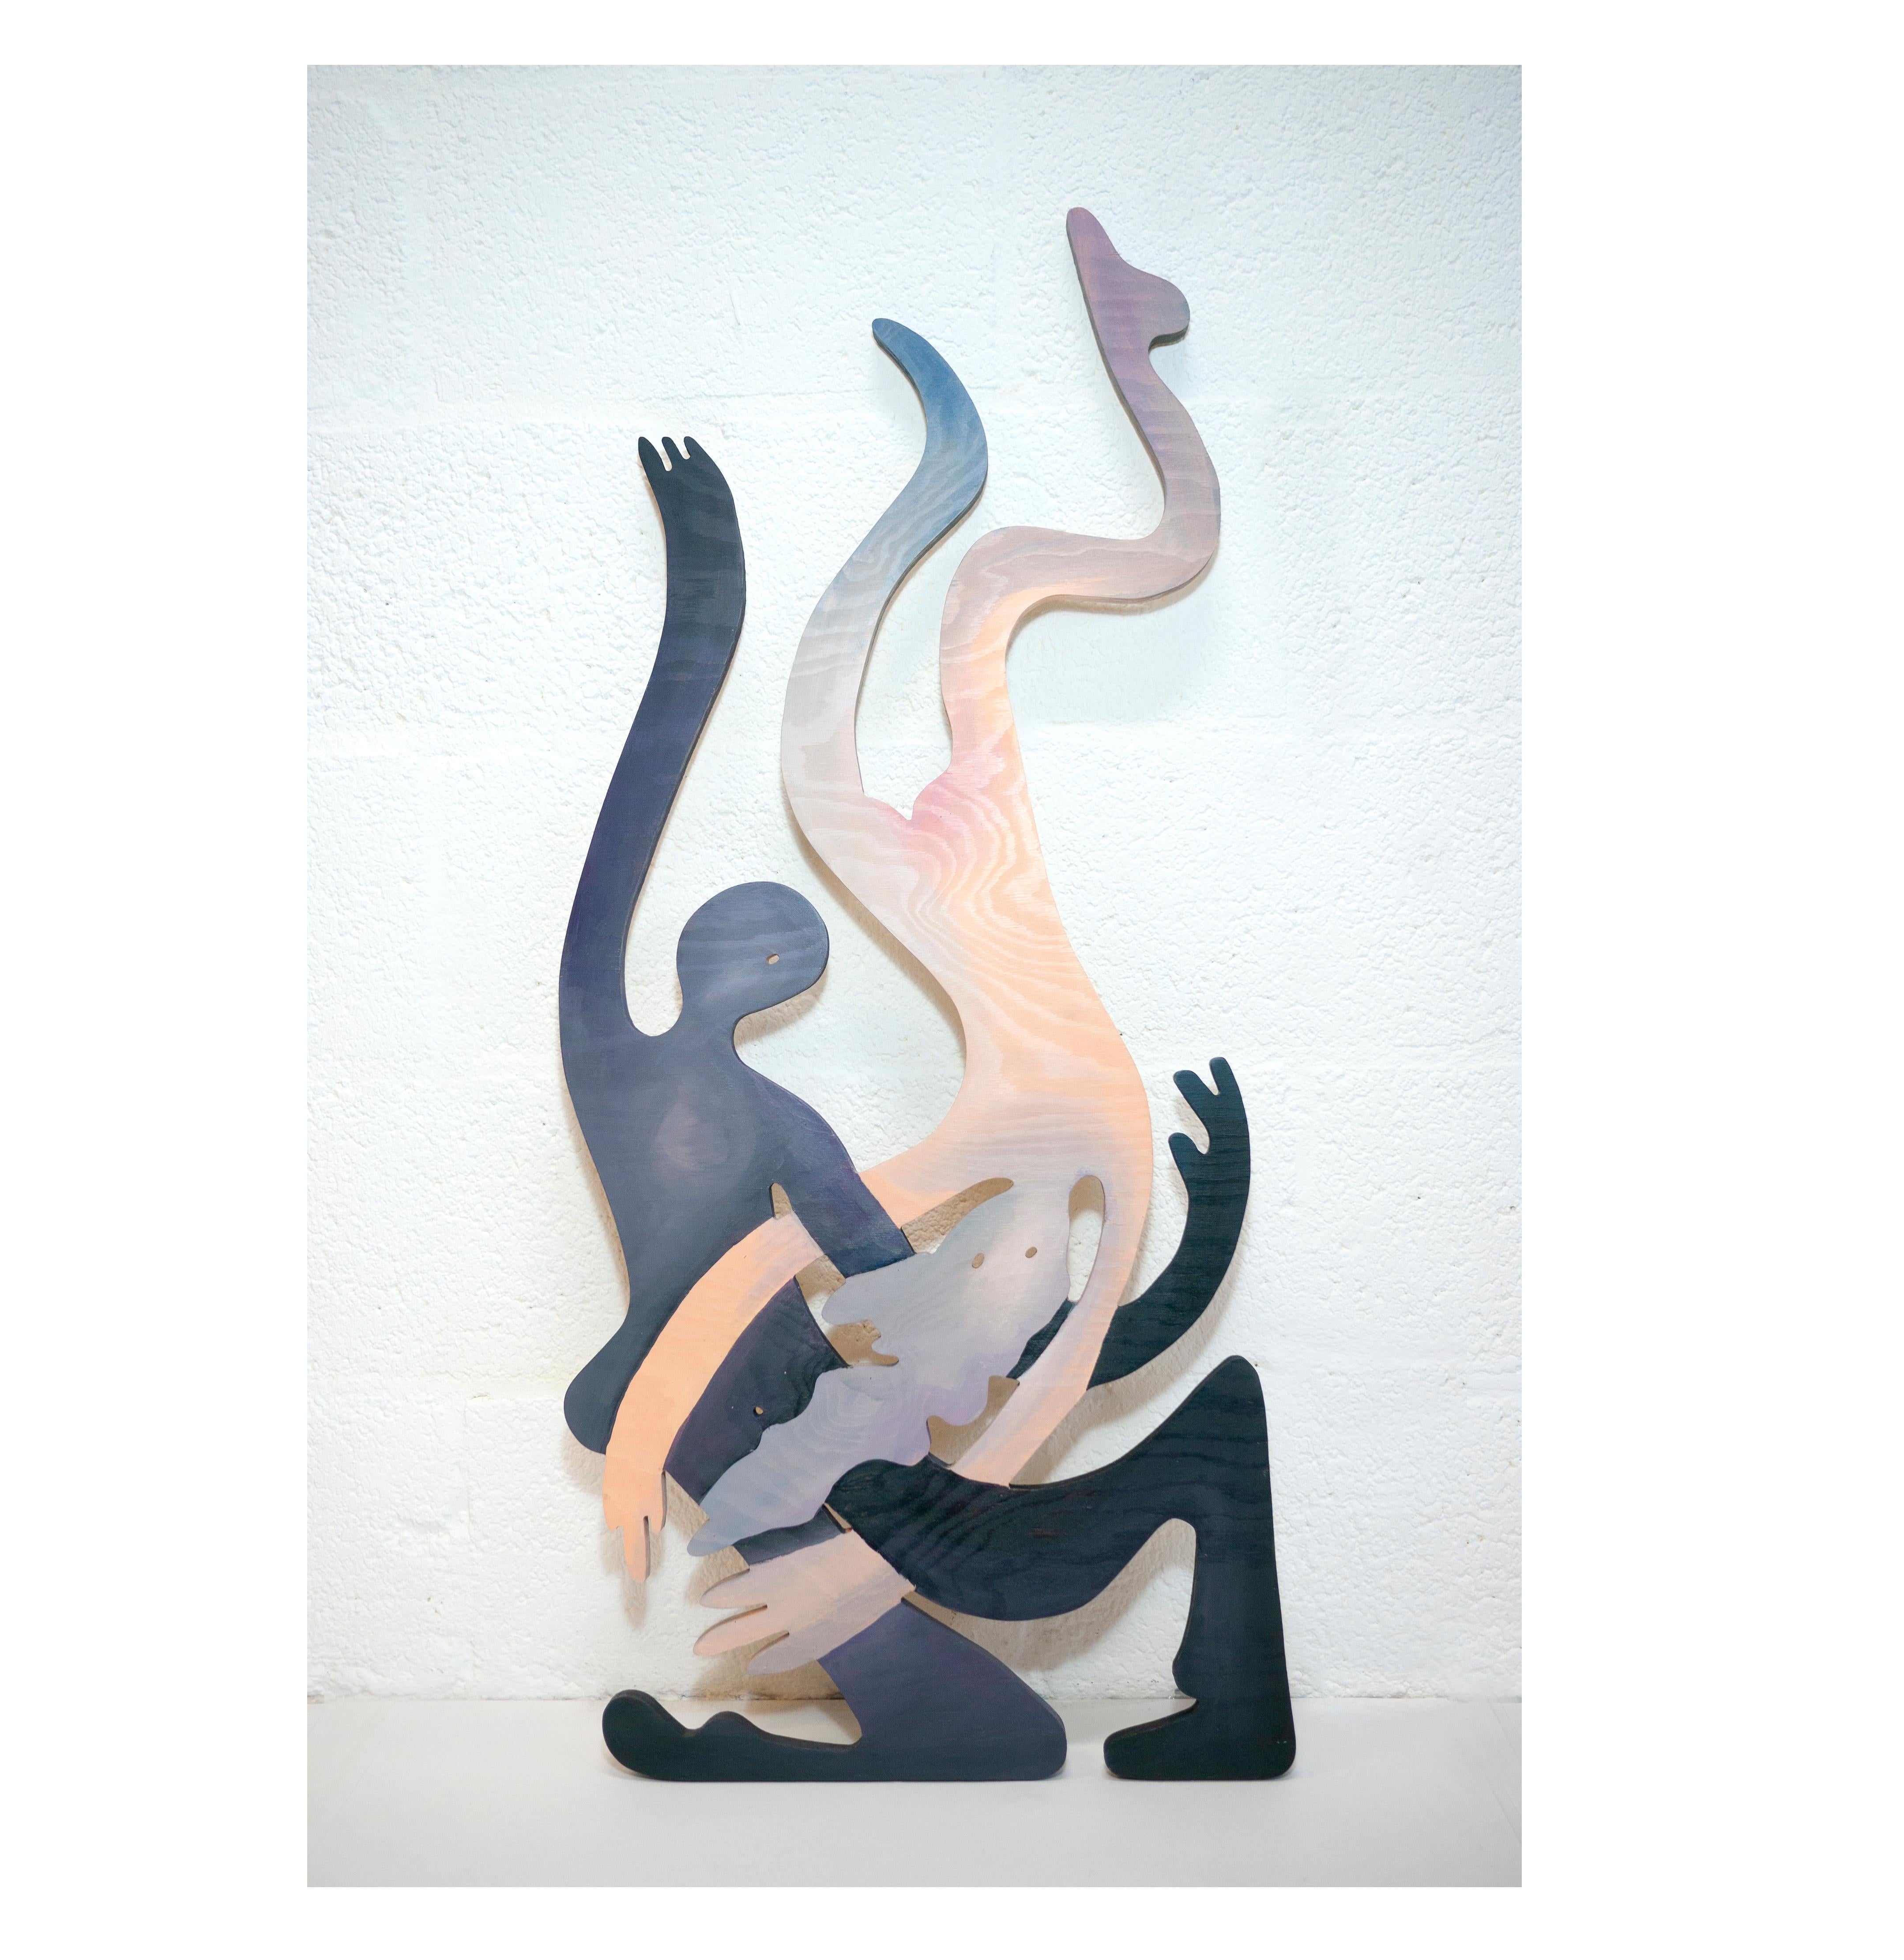 Pure Joy Embrace is two guradian angels of joy for your home. Two bodies made of stars, their murual gravitation keeps them in an ever weightless dance. Their differences keep the balance, making each other shine. Creating their own